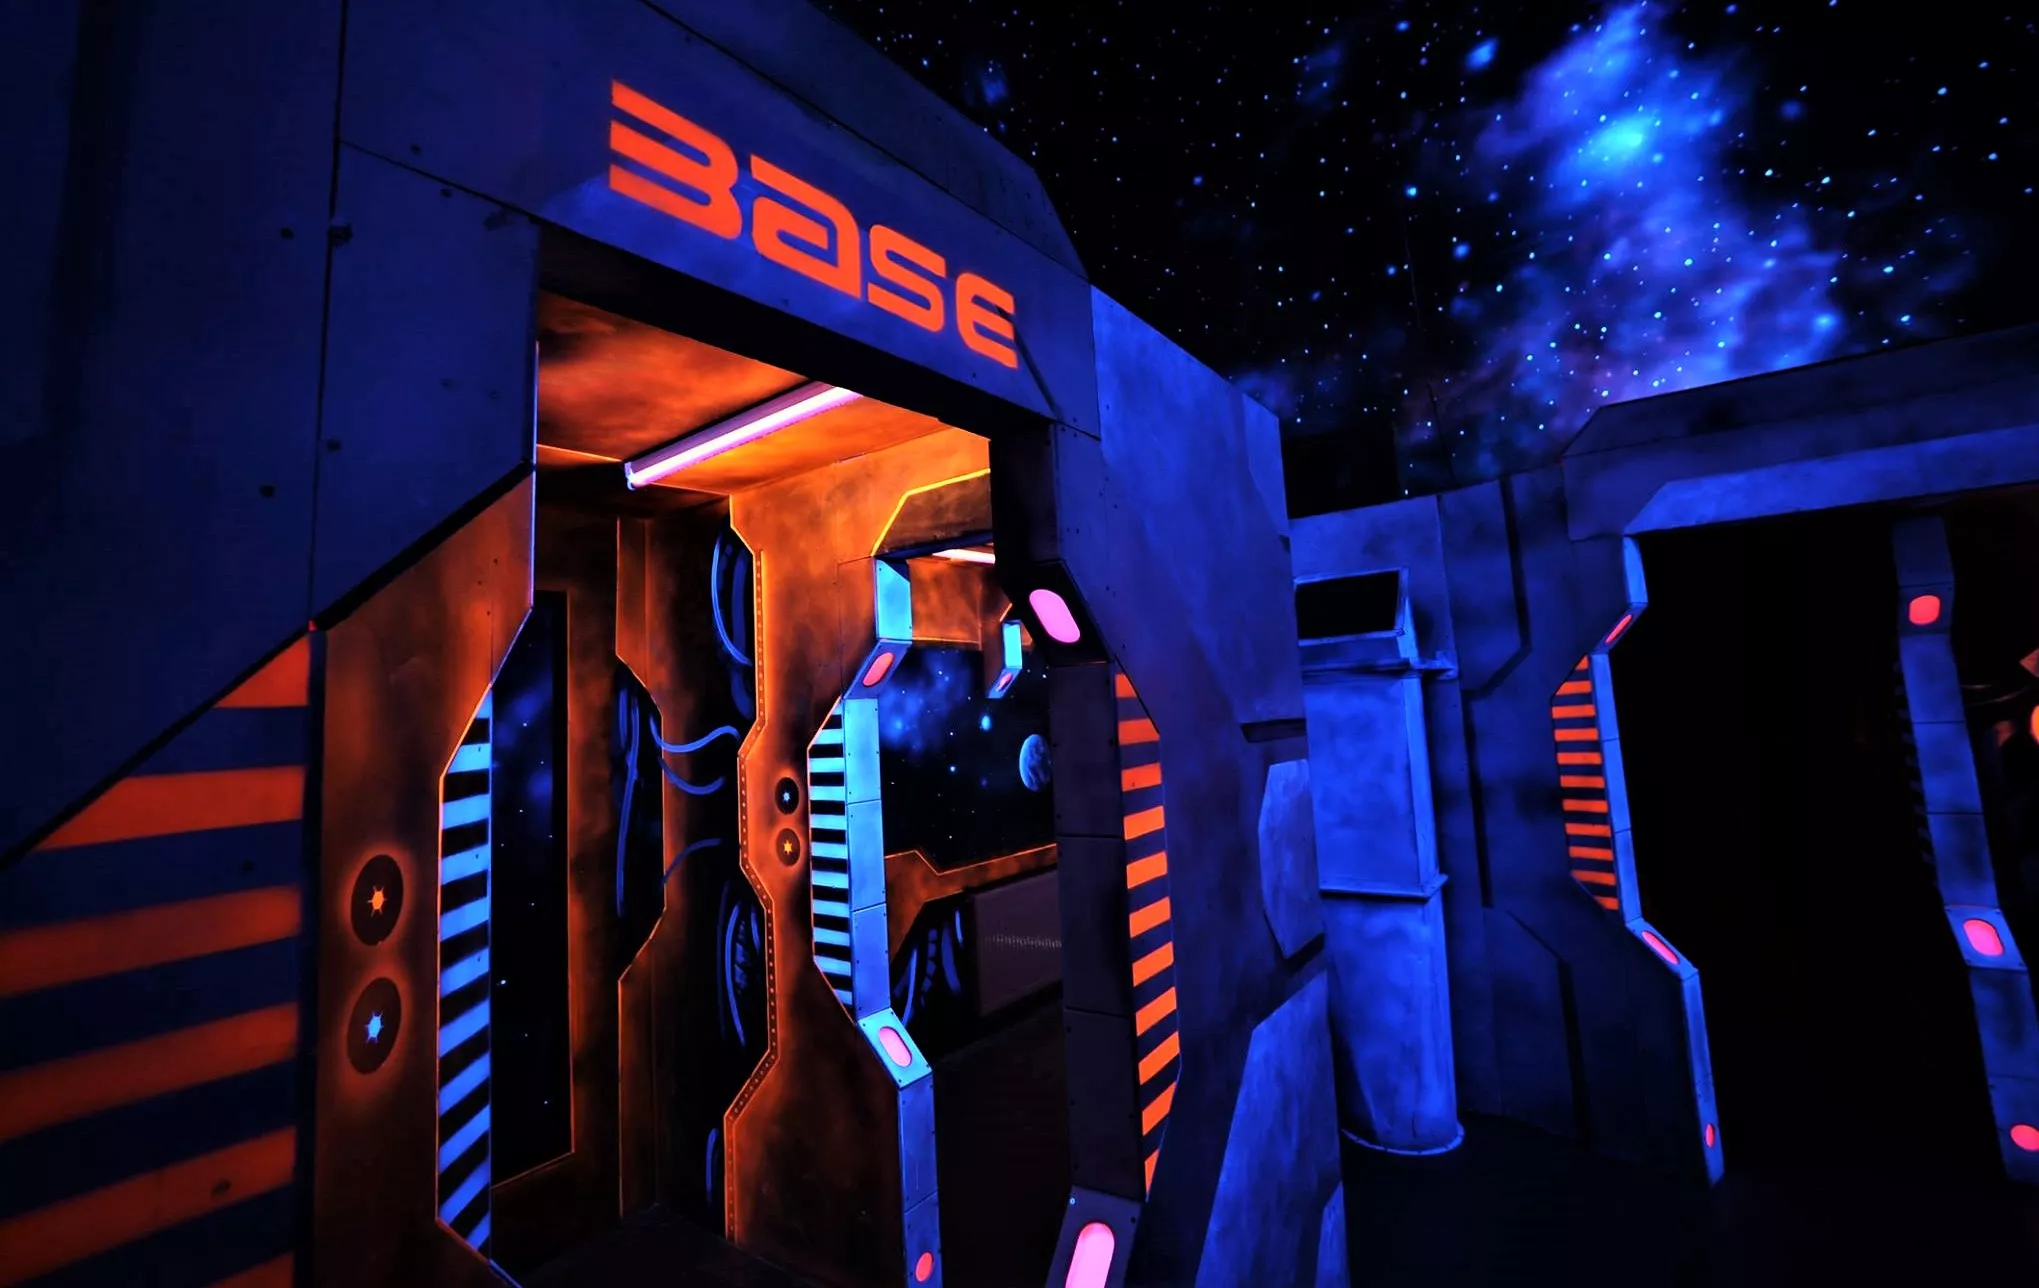 Megazone Laser Tag in Romania, Europe | Laser Tag - Rated 4.2